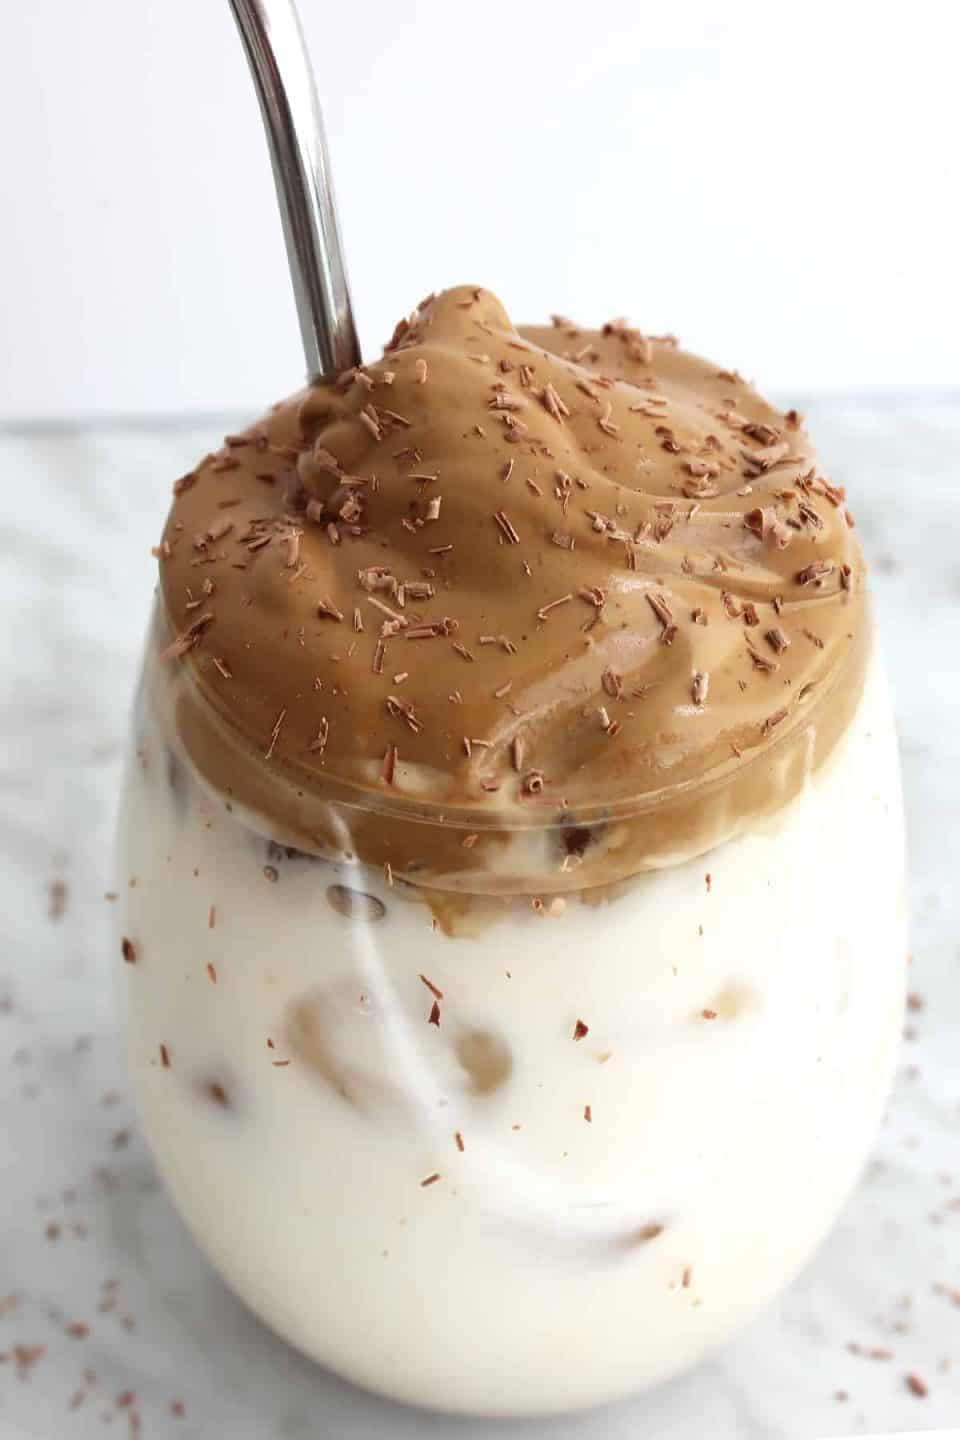 Whipped coffee ontop of a glass of milk with a metal straw